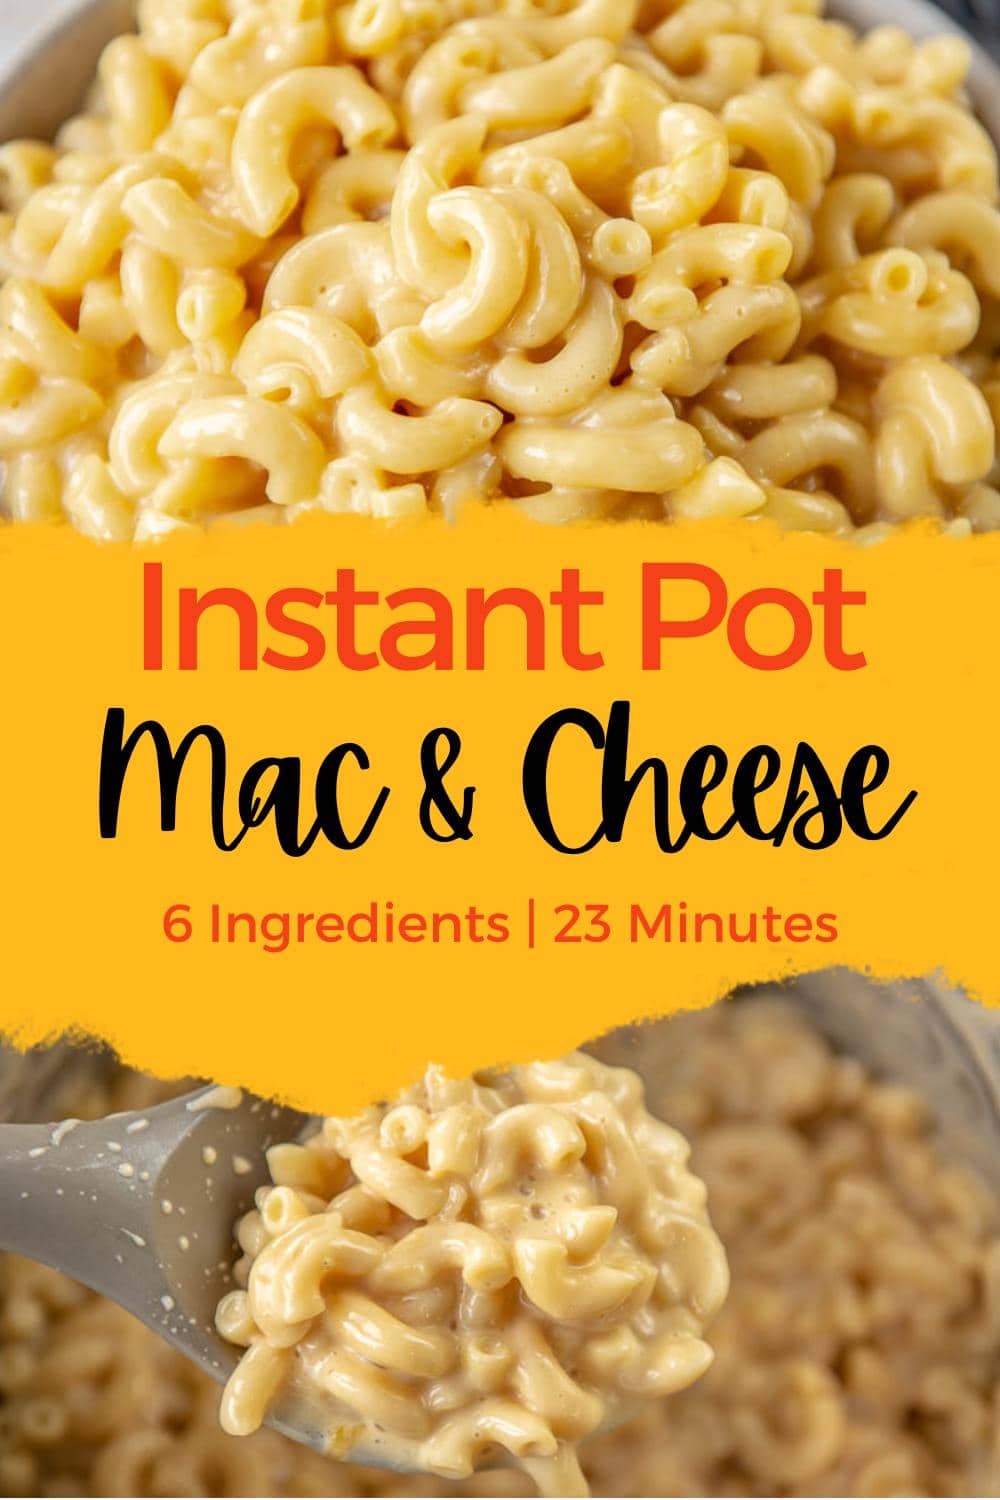 Instant Pot Mac & Cheese - Garnished Plate